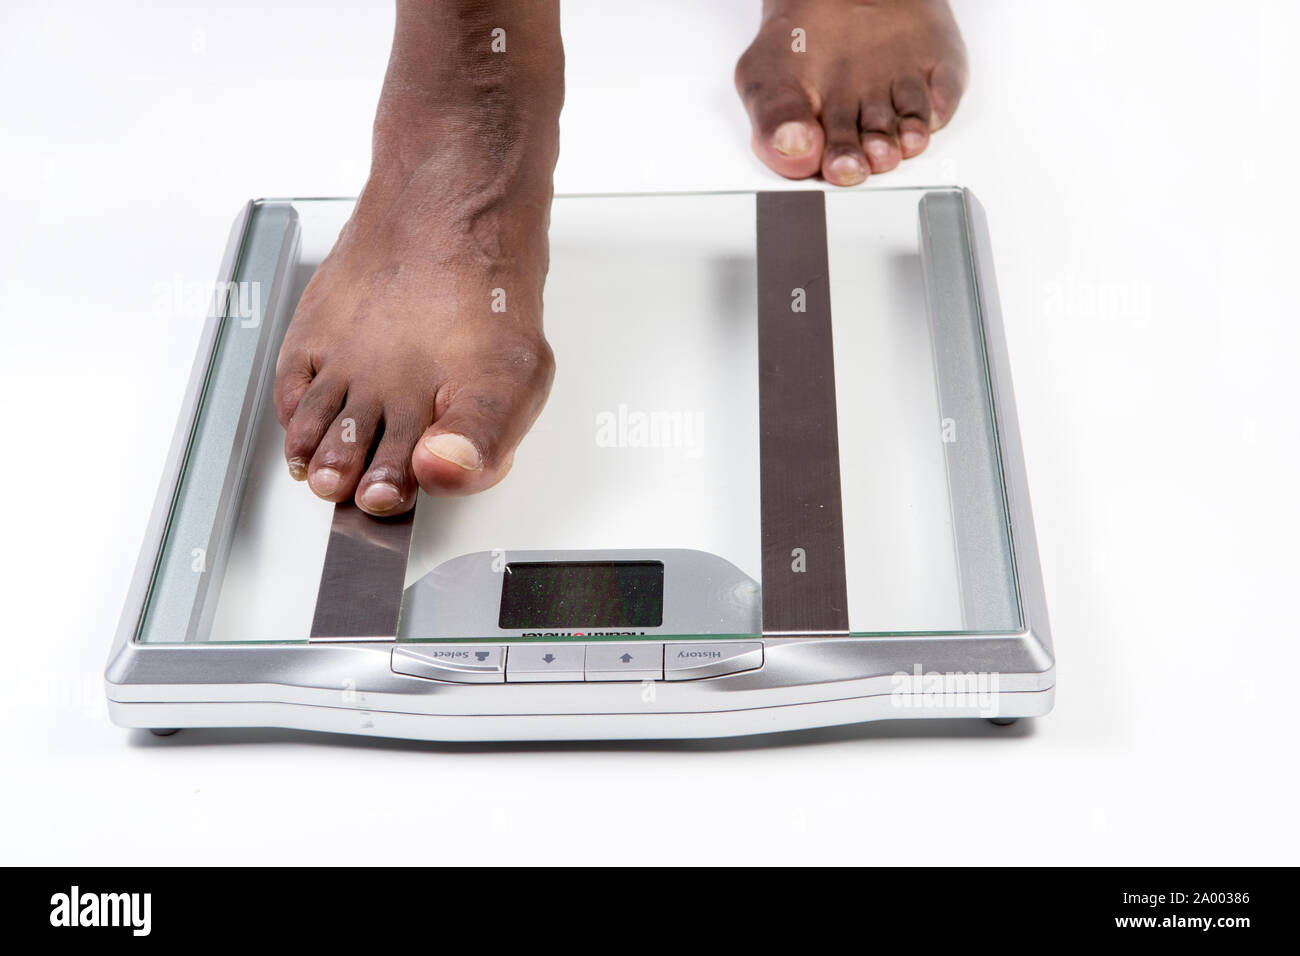 https://c8.alamy.com/comp/2A00386/male-feet-stepping-on-electronic-scales-for-weight-control-on-white-background-the-concept-of-slimming-and-weight-loss-2A00386.jpg